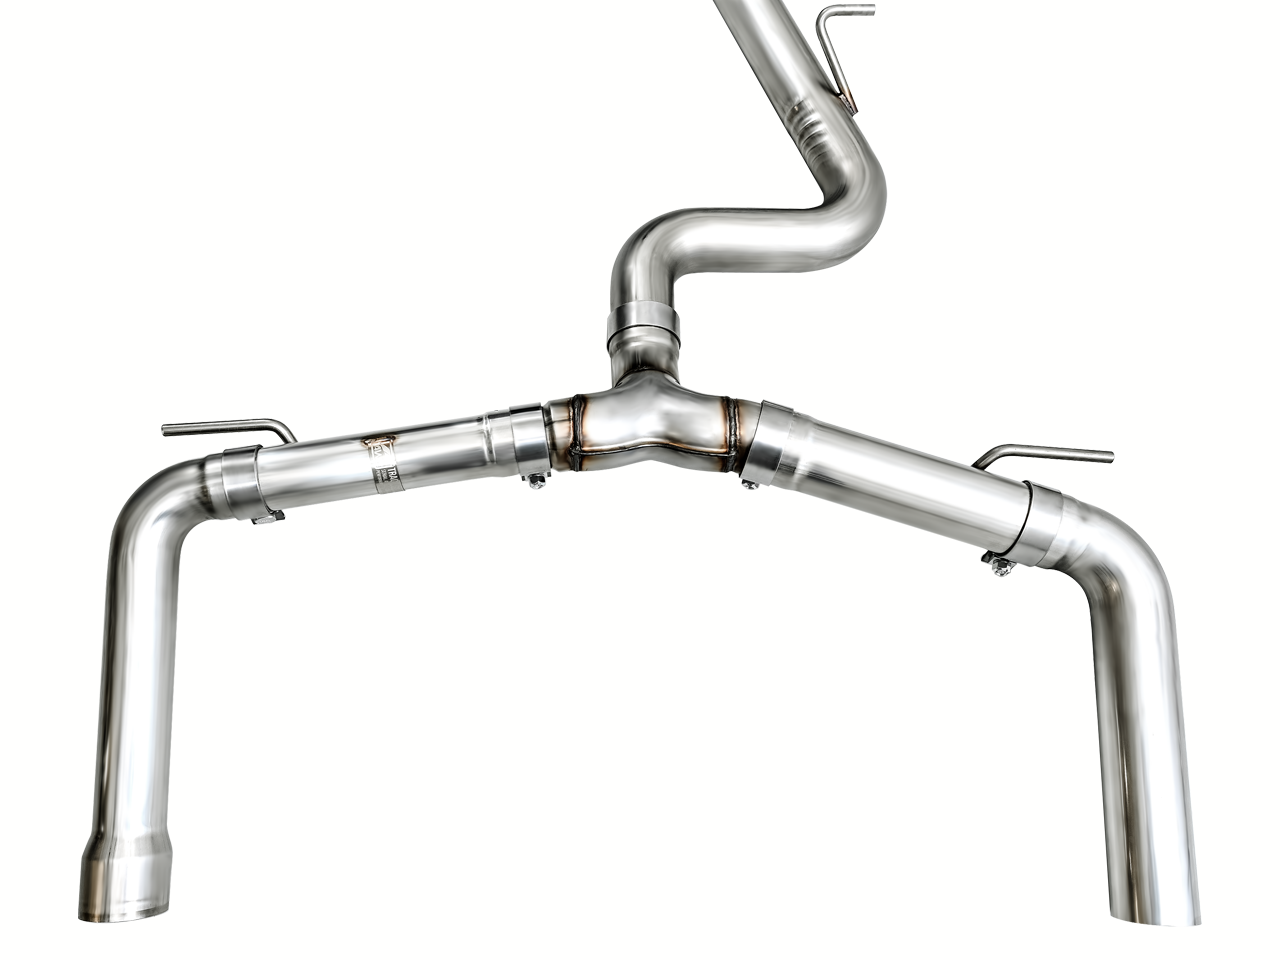 AWE Track Edition Exhaust for Audi 8Y RS 3 (3020-31389)